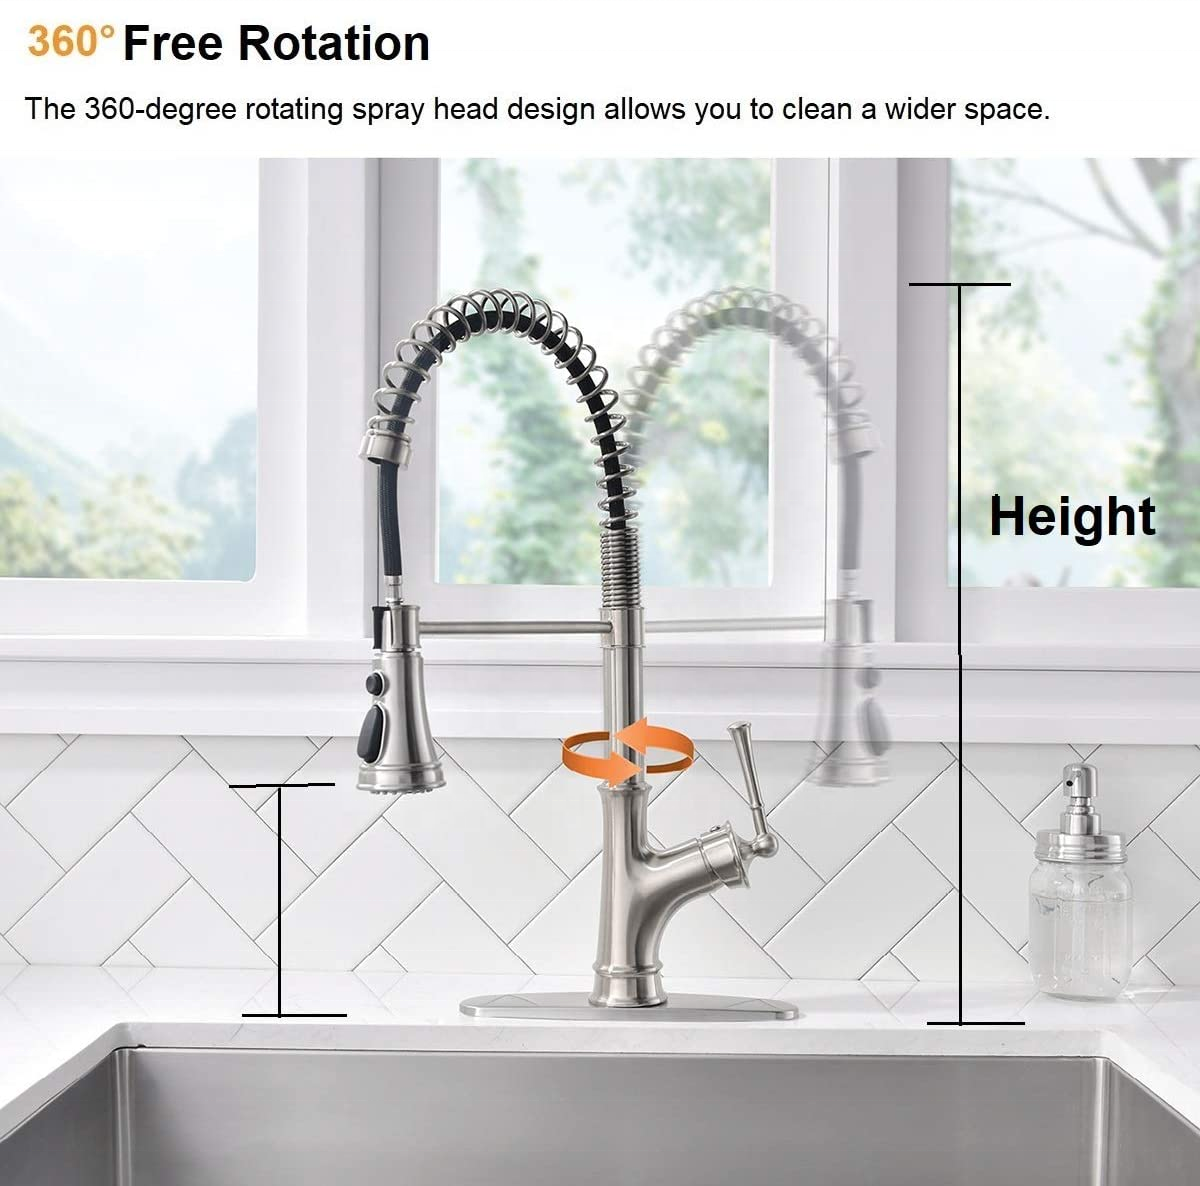 Spring Loaded Kitchen Sink Mixer Tap Faucets Brushed Nickle Faucet With Base Plate Kitchen Sink Faucets